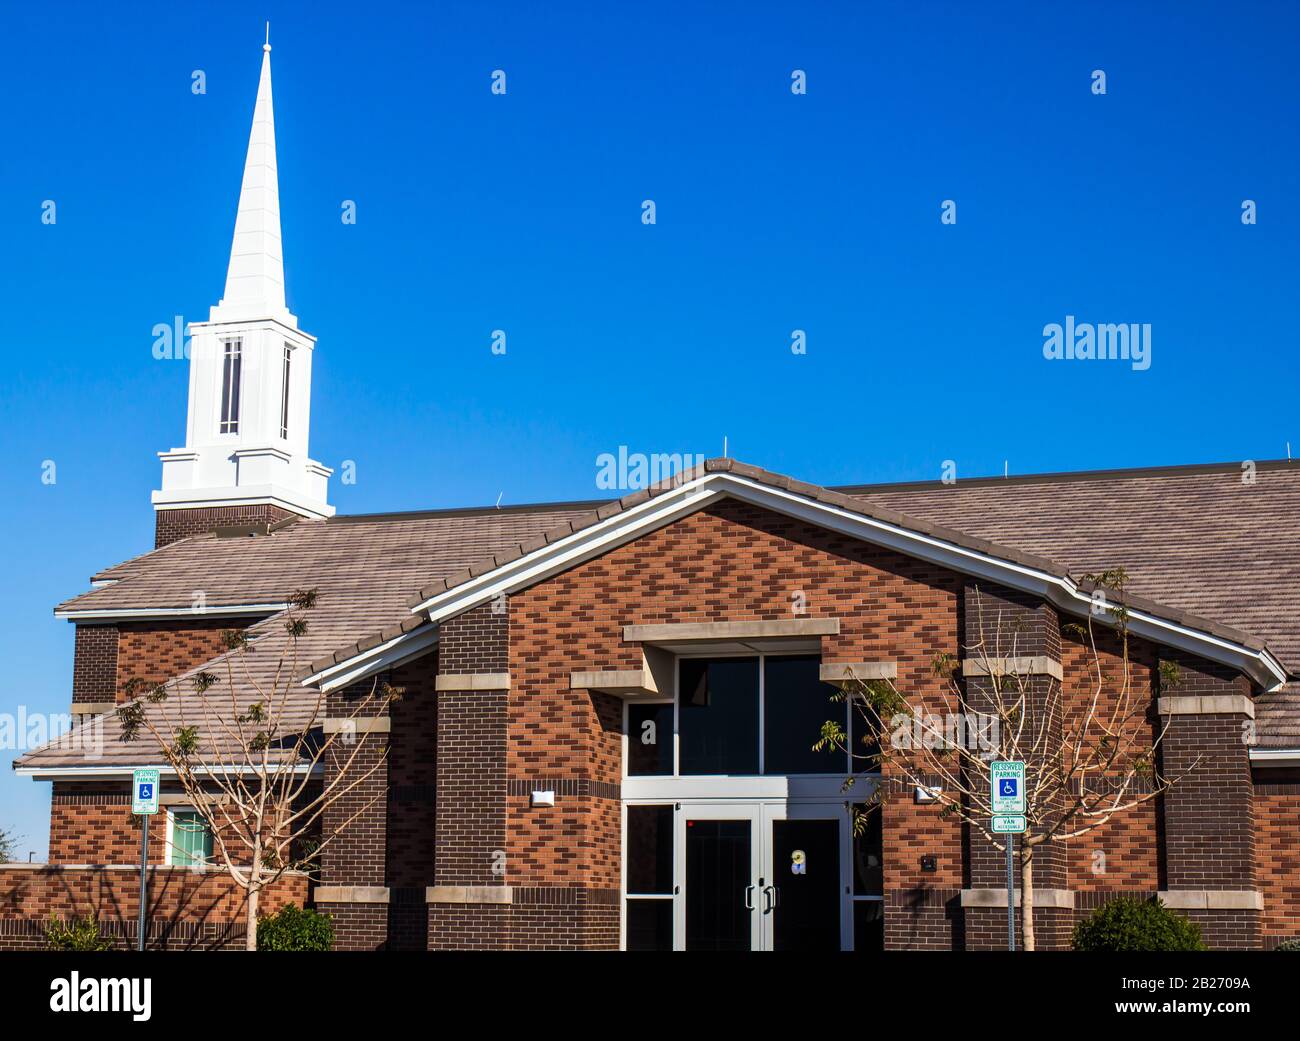 Entry To Local Neighborhood Church With White Steeple Stock Photo